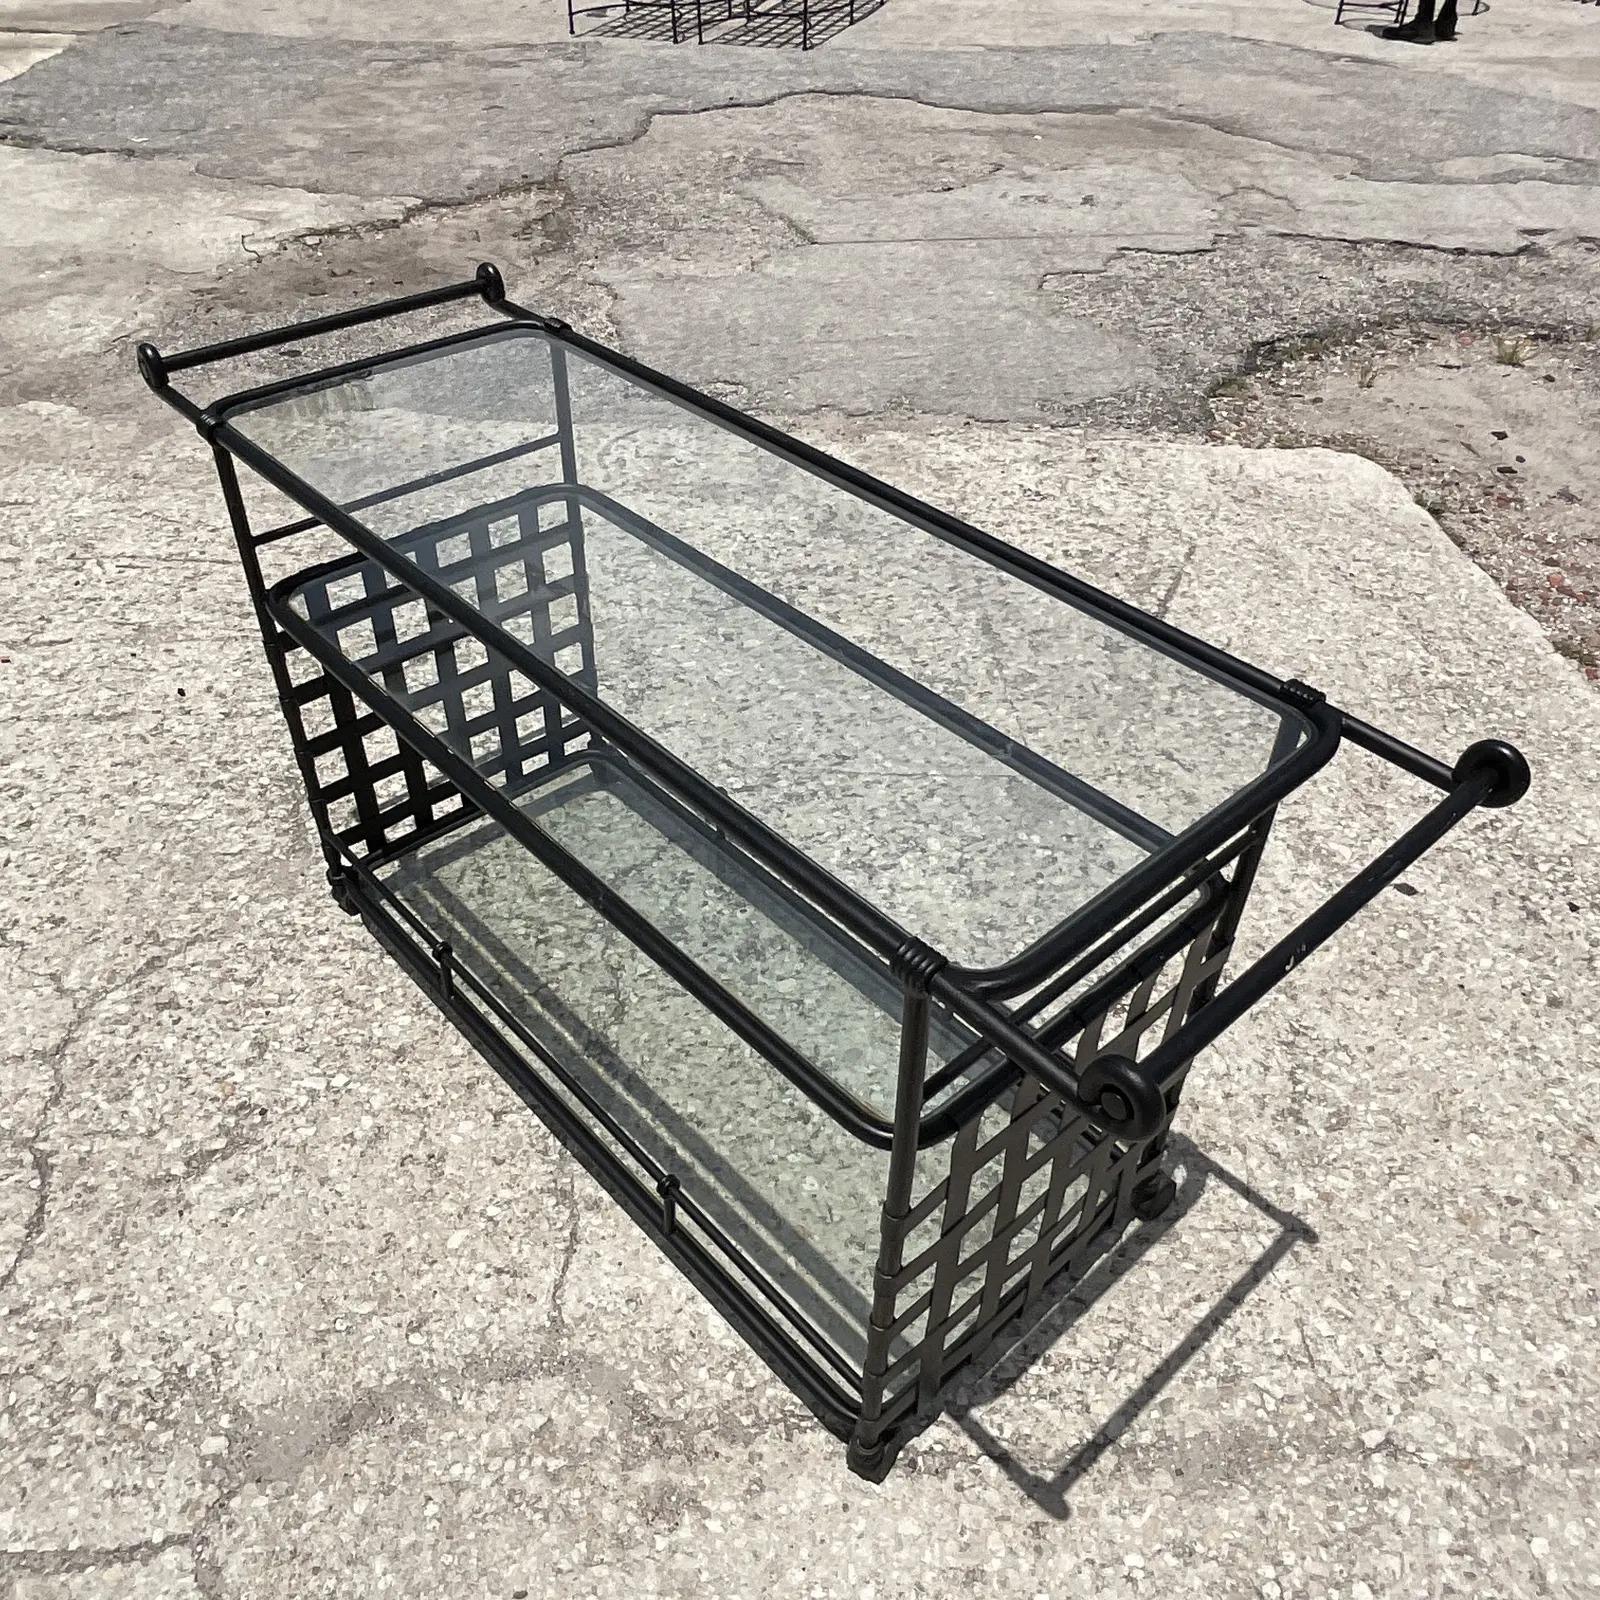 Fantastic vintage Coastal bar cart. Made by the iconic Brown Jordan in the coveted Florentine design. A matte black finish on a wrought iron frame. Inset glass shelves. Unmarked. Acquired from a Palm Beach estate.